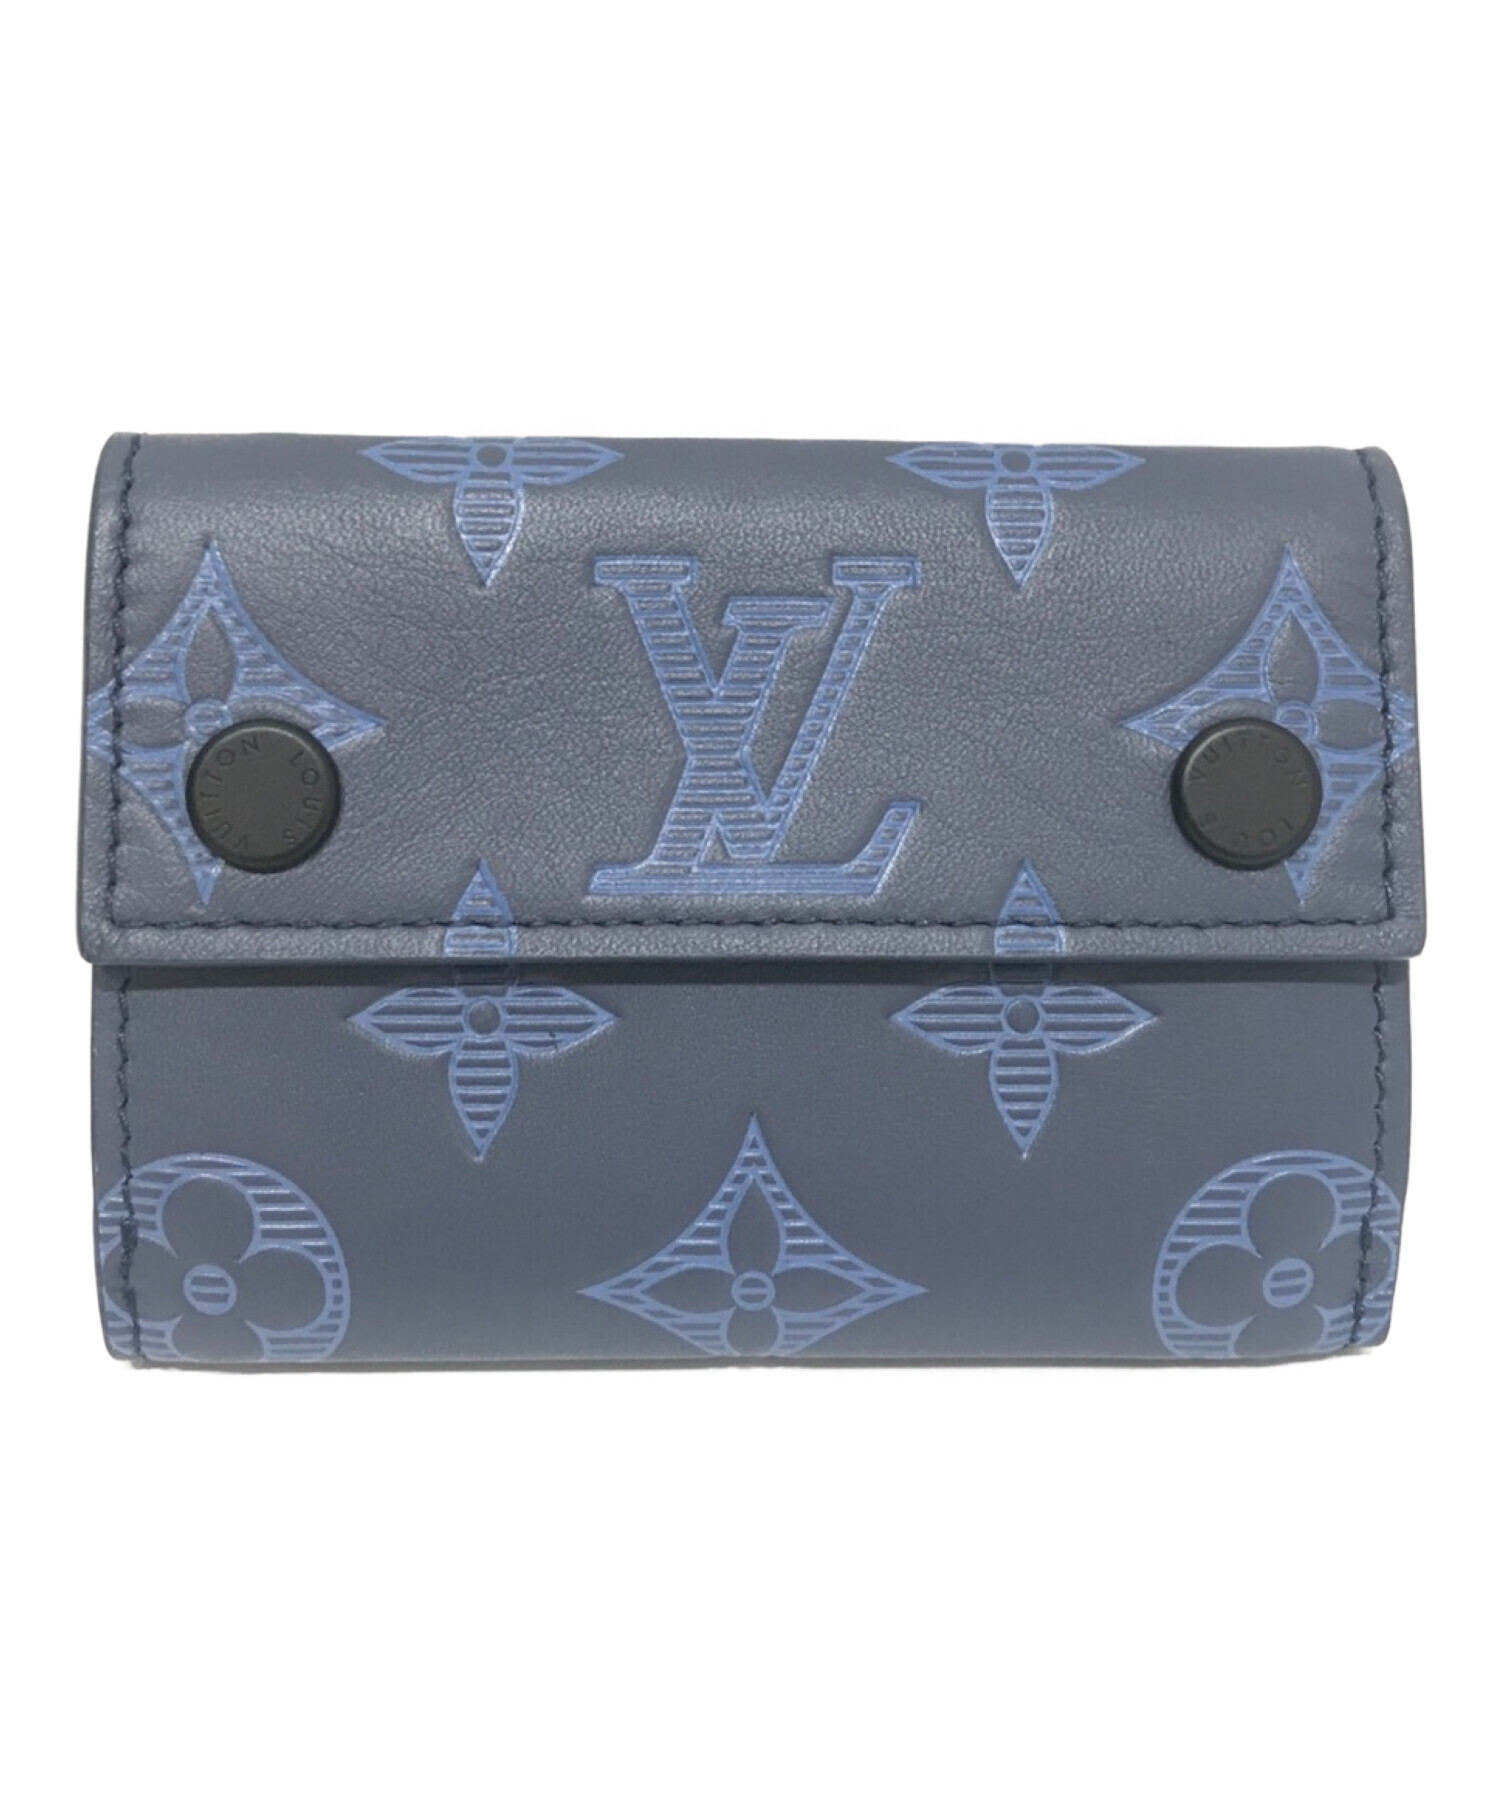 LOUIS VUITTON ルイヴィトン☆ポルトモネ ロザリ☆コンパクト財布